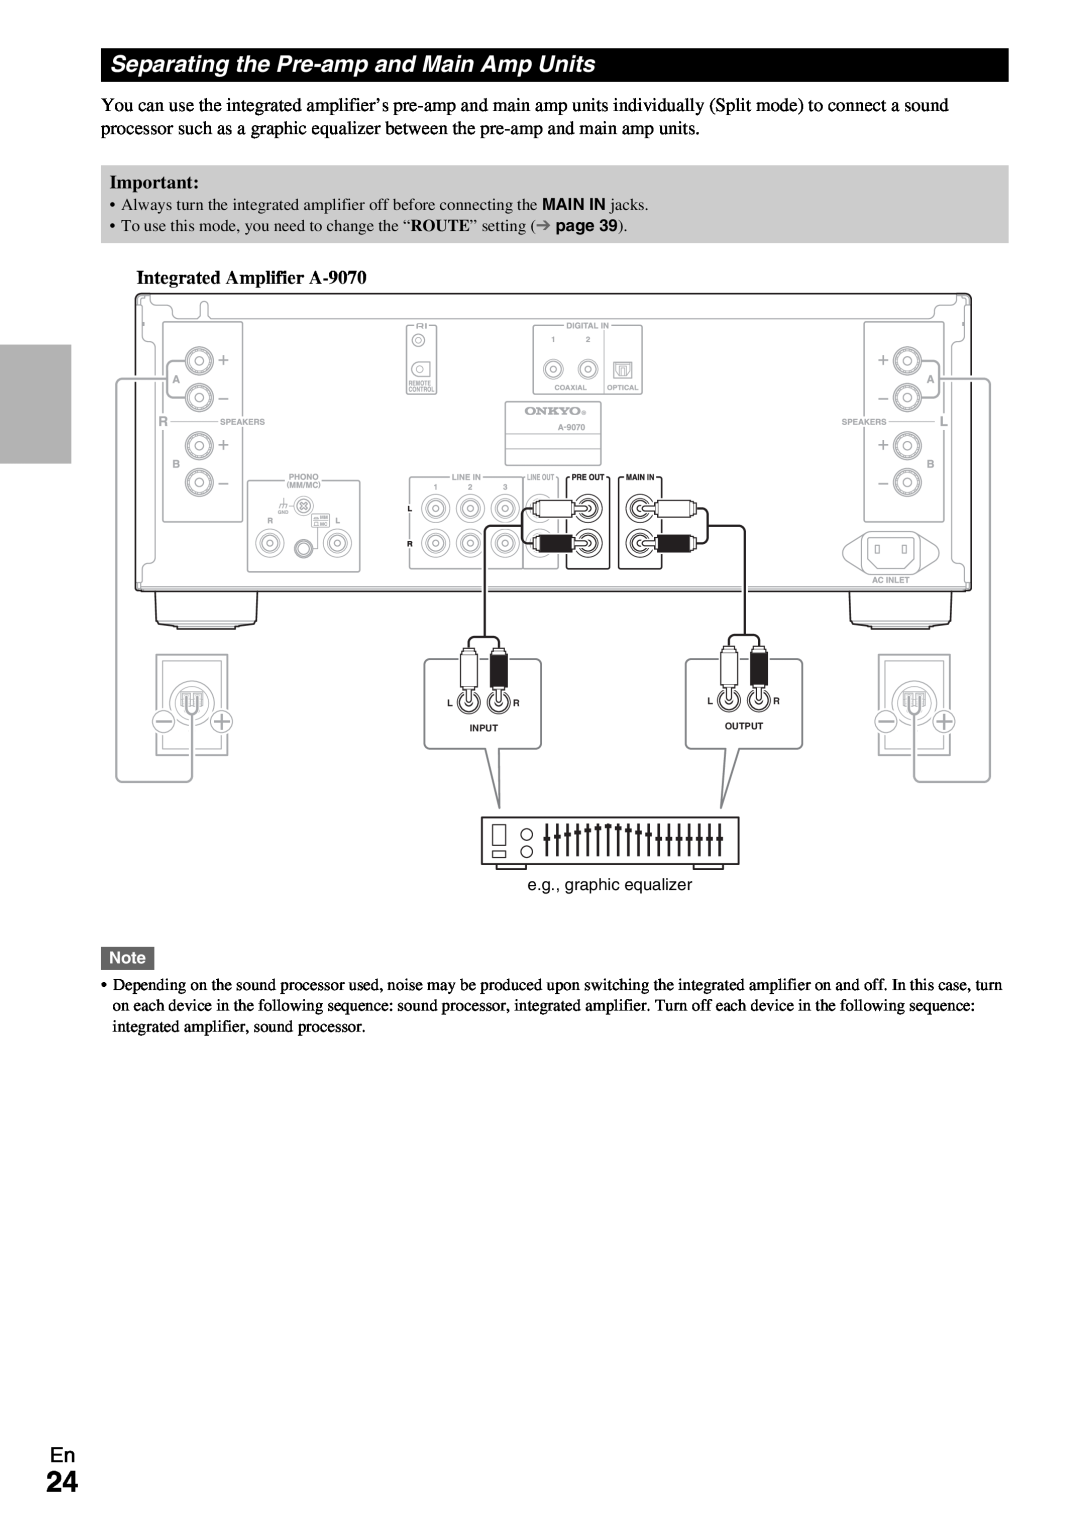 Onkyo instruction manual Separating the Pre-ampand Main Amp Units, Integrated Amplifier A-9070, e.g., graphic equalizer 